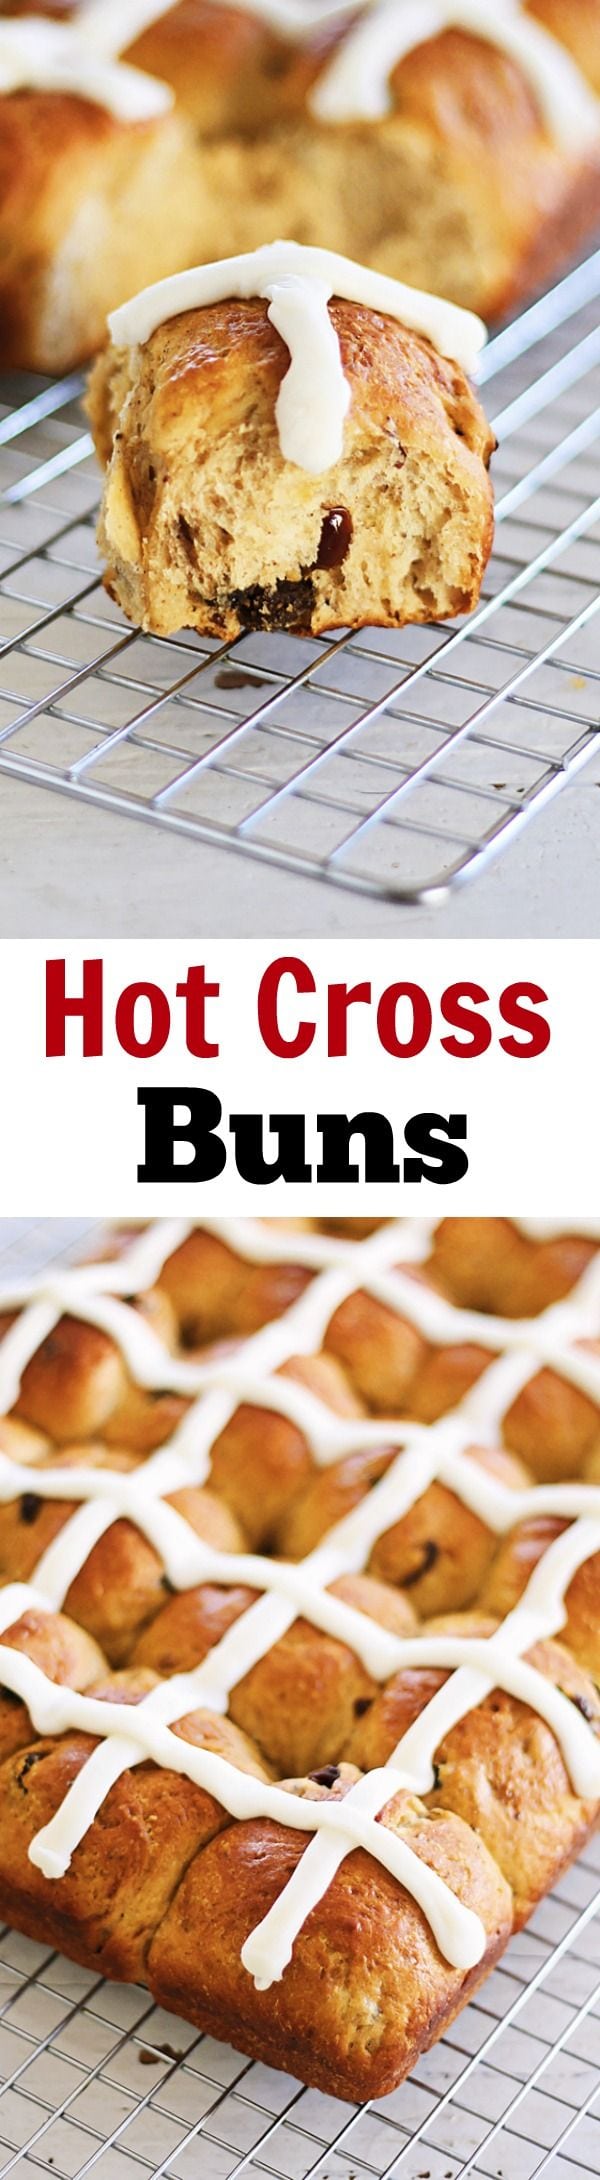 Hot Cross Buns - soft, fluff and pillowy hot cross buns spiced with cinnamon, cloves and loaded with dried fruits. So good you can't stop eating!! | rasamalaysia.com